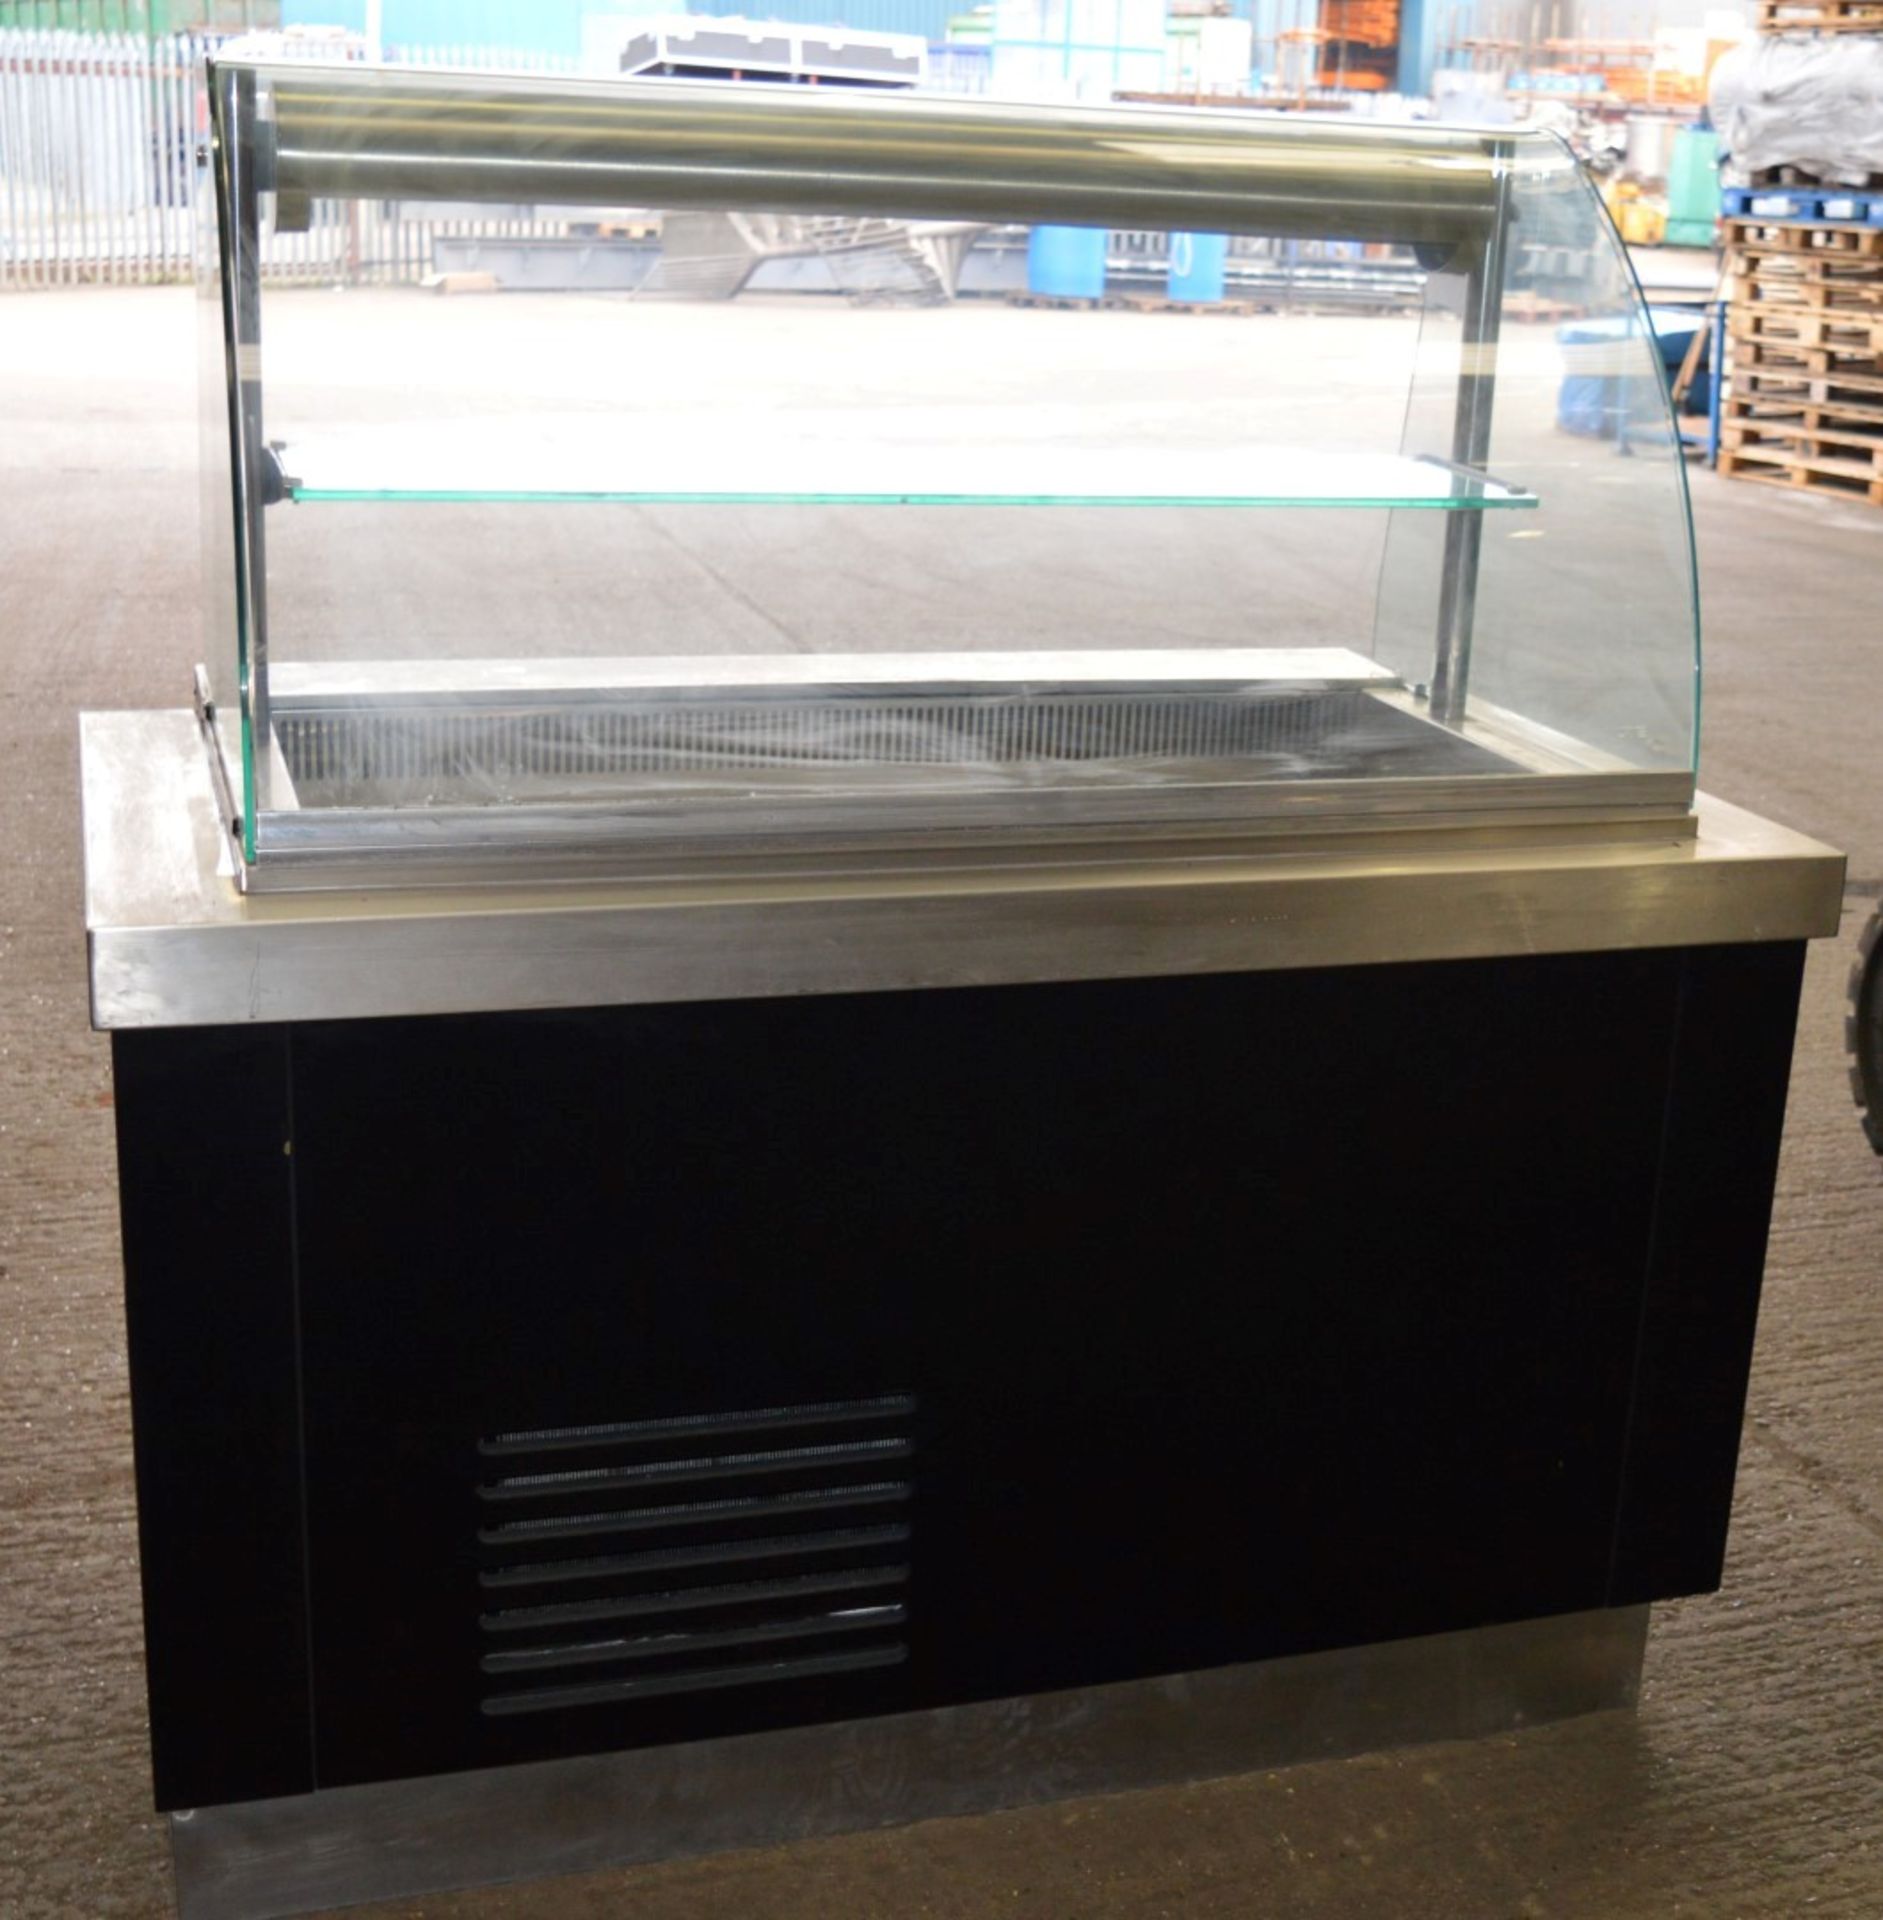 1 x Heated Deli Serving Counter - Ideal For Pub Carvery, Canteens, All You Can Eat Restaurants, - Image 2 of 9